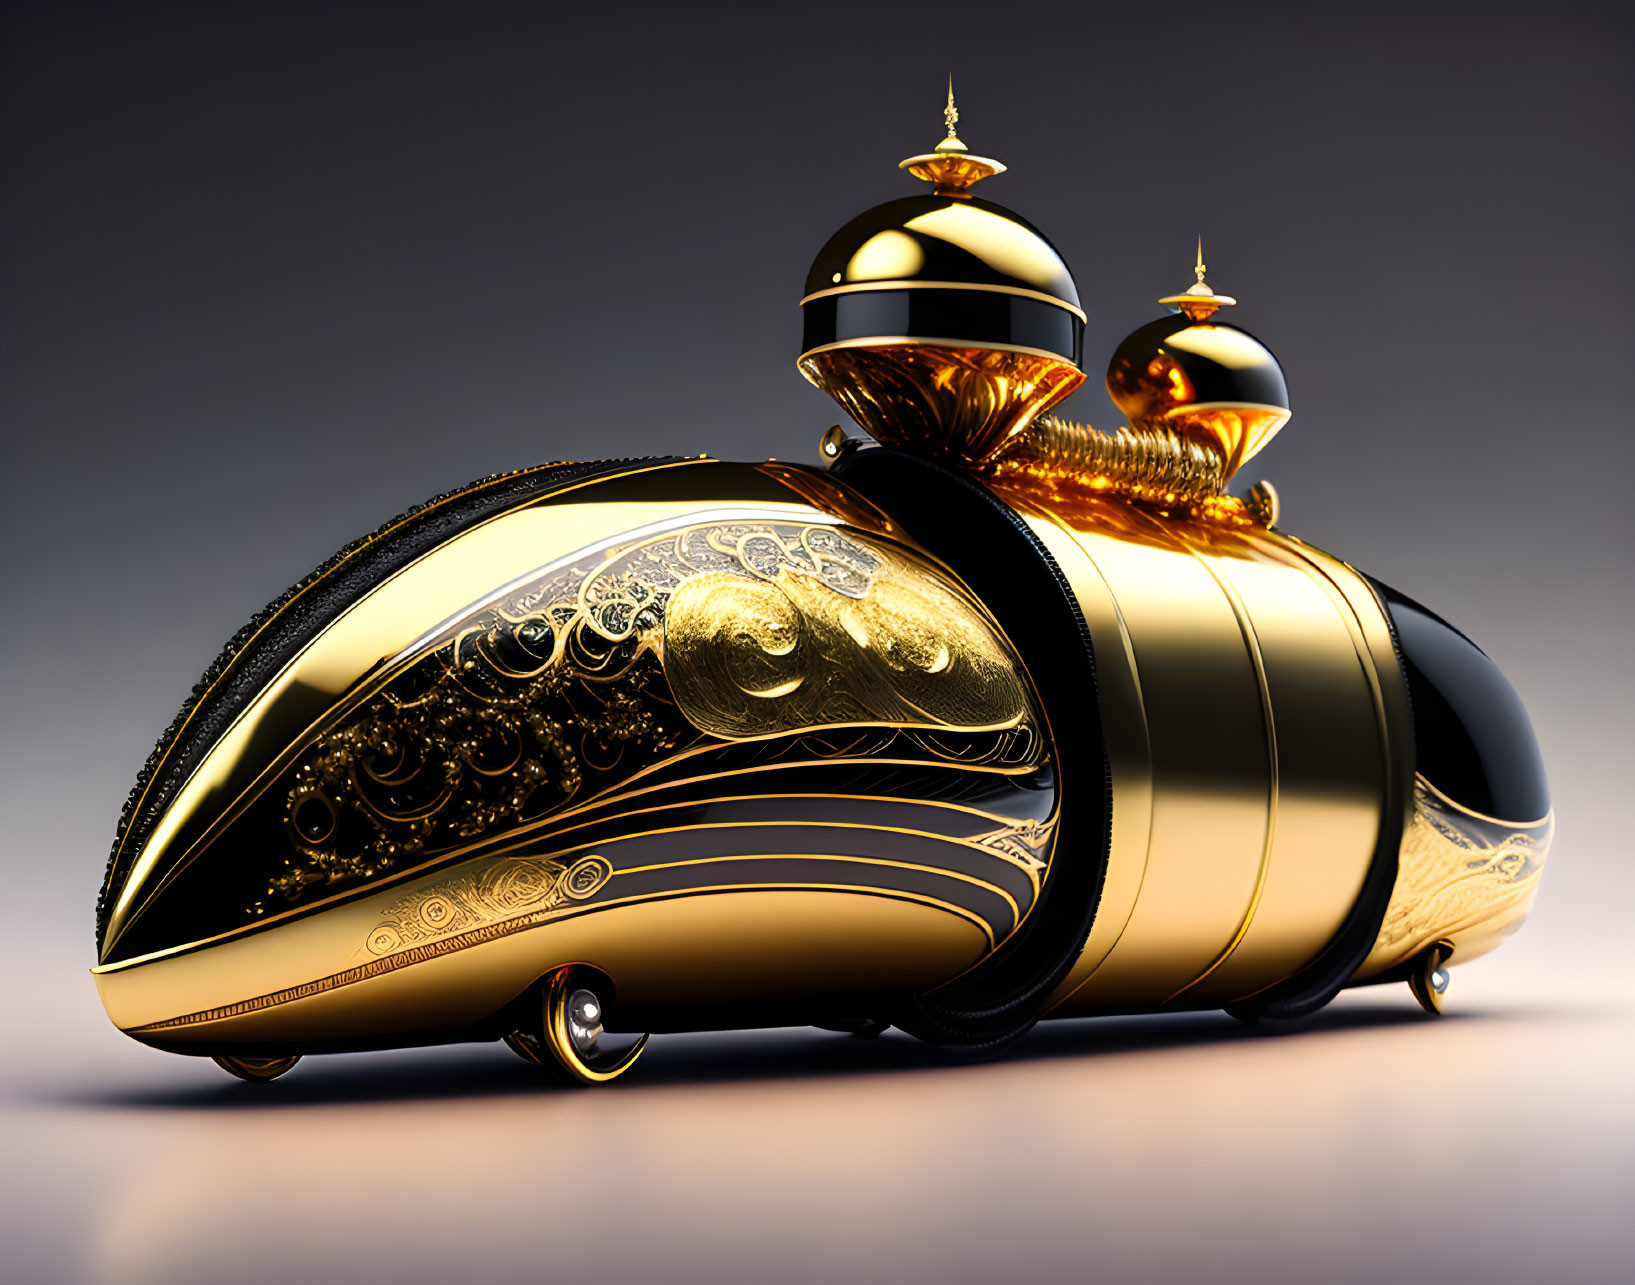 Luxurious gold and black futuristic car design with intricate patterns